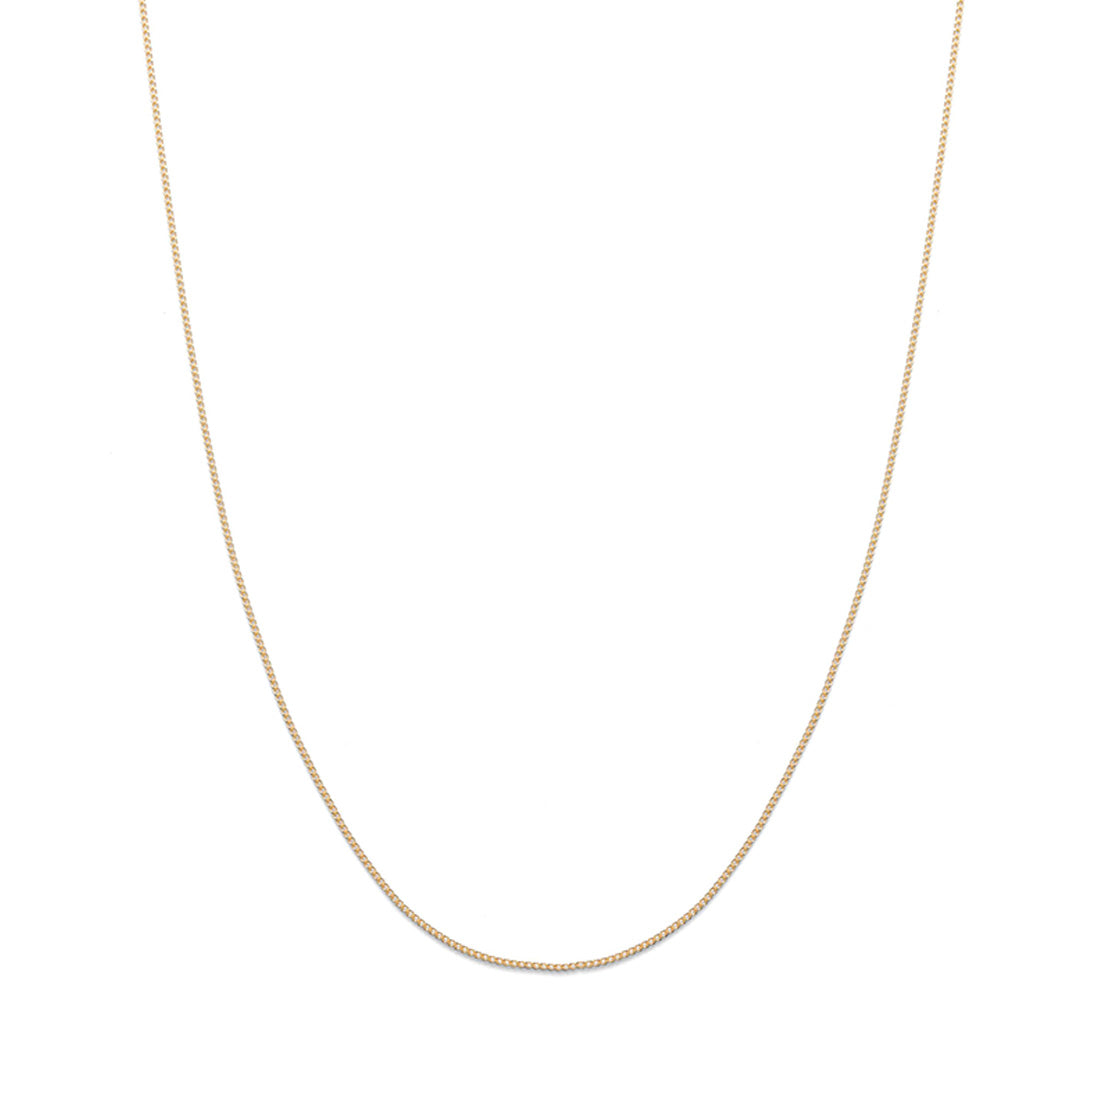 18K　イエローゴールド　Curb Chain　カーブチェーン　Necklace　ネックレス